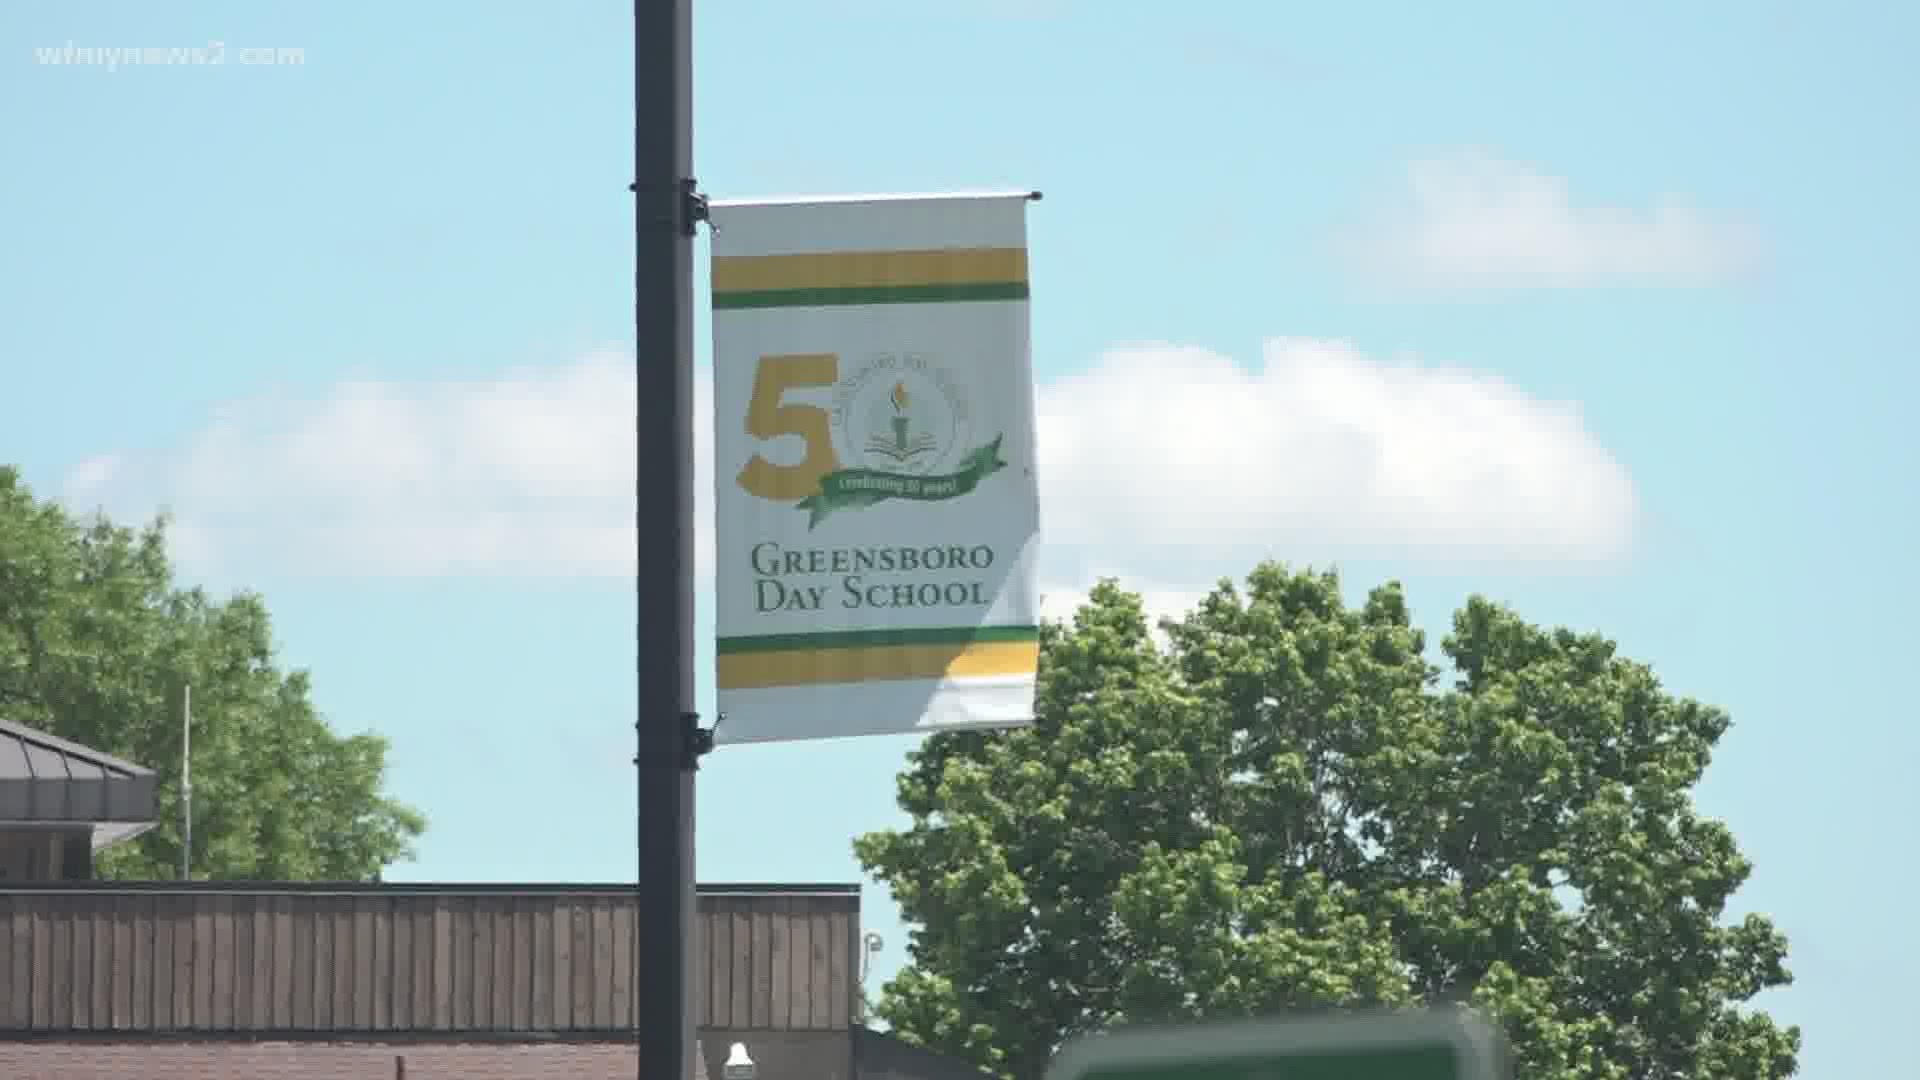 Greensboro Day School students can choose elearning next year